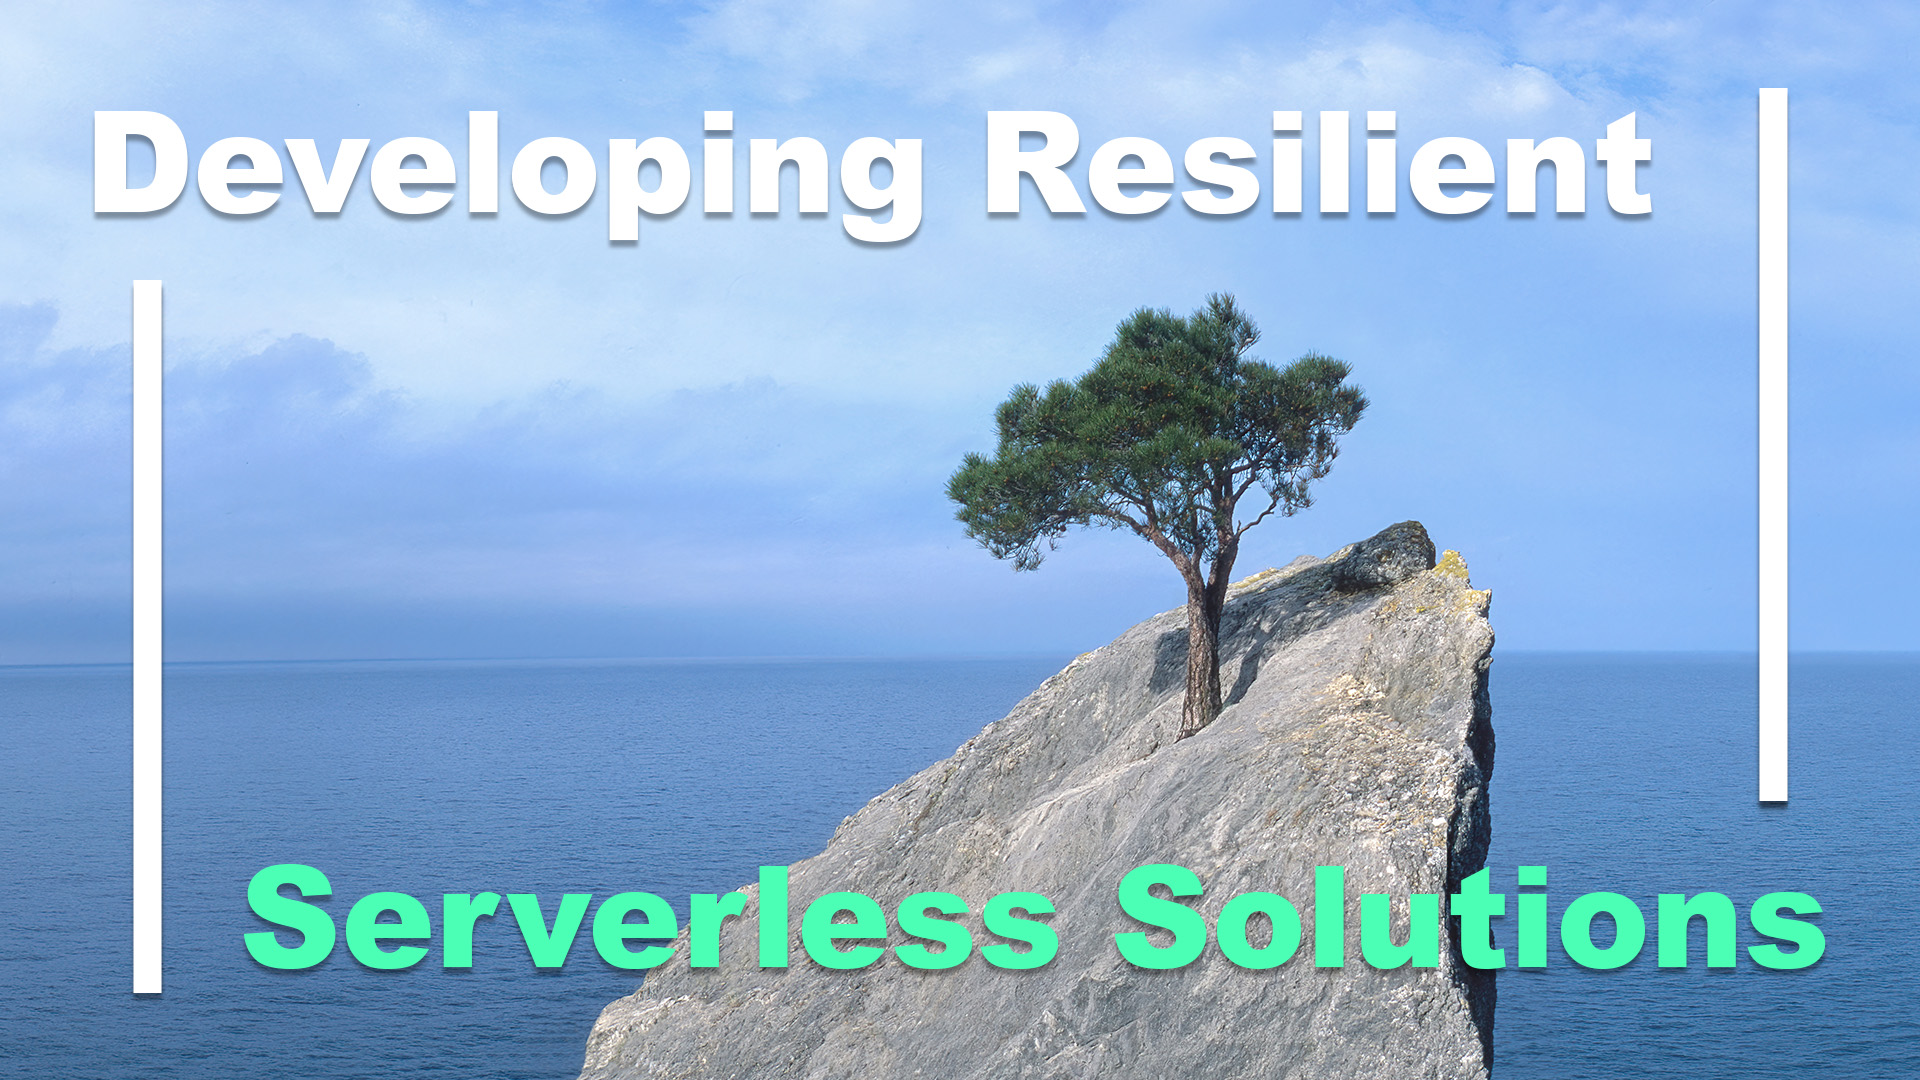 Developing Resilient Serverless Solutions